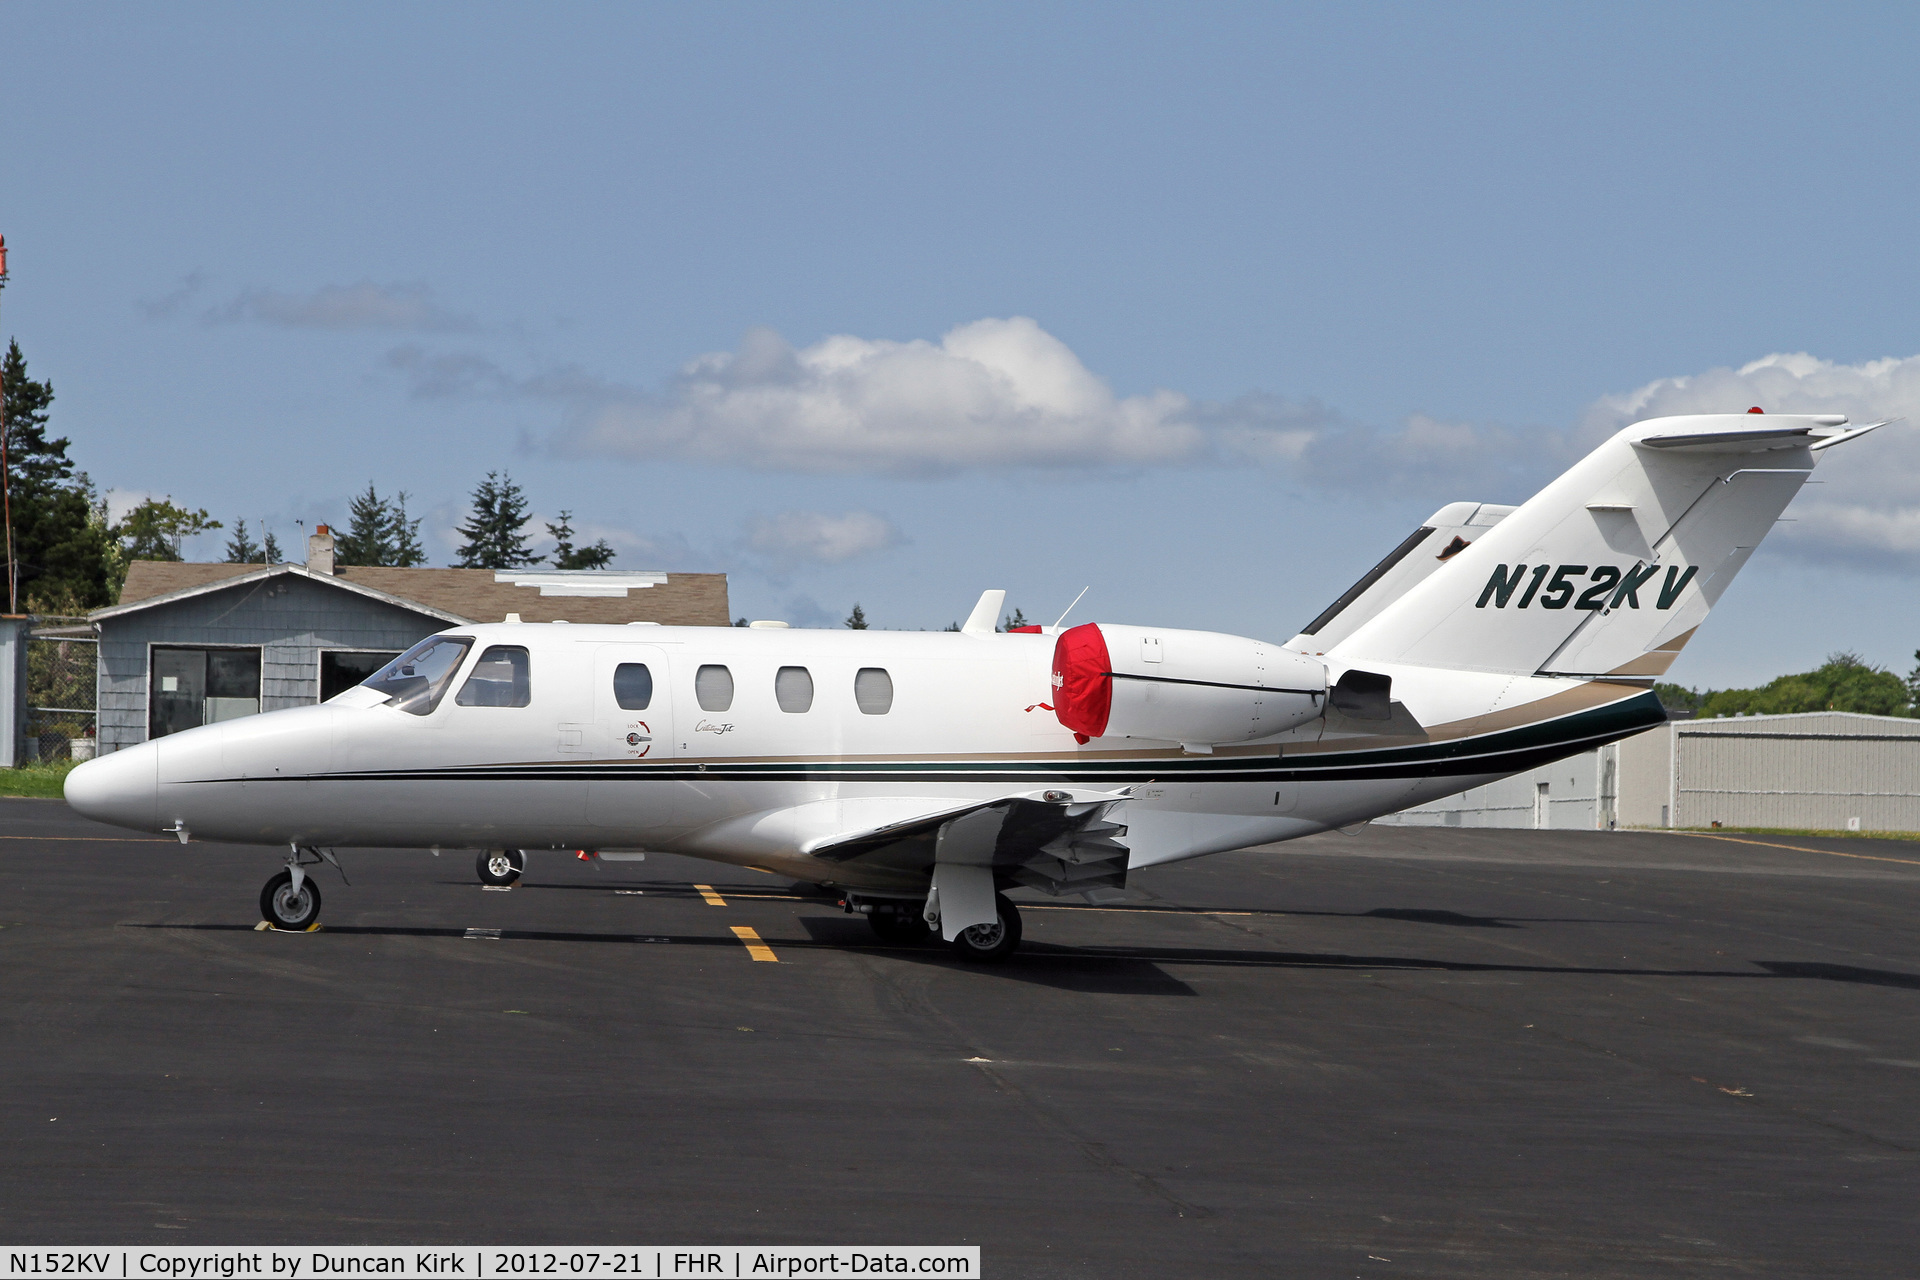 N152KV, 1996 Cessna 525 CitationJet C/N 525-0152, FHR is frequented by small bizjets during the summer months